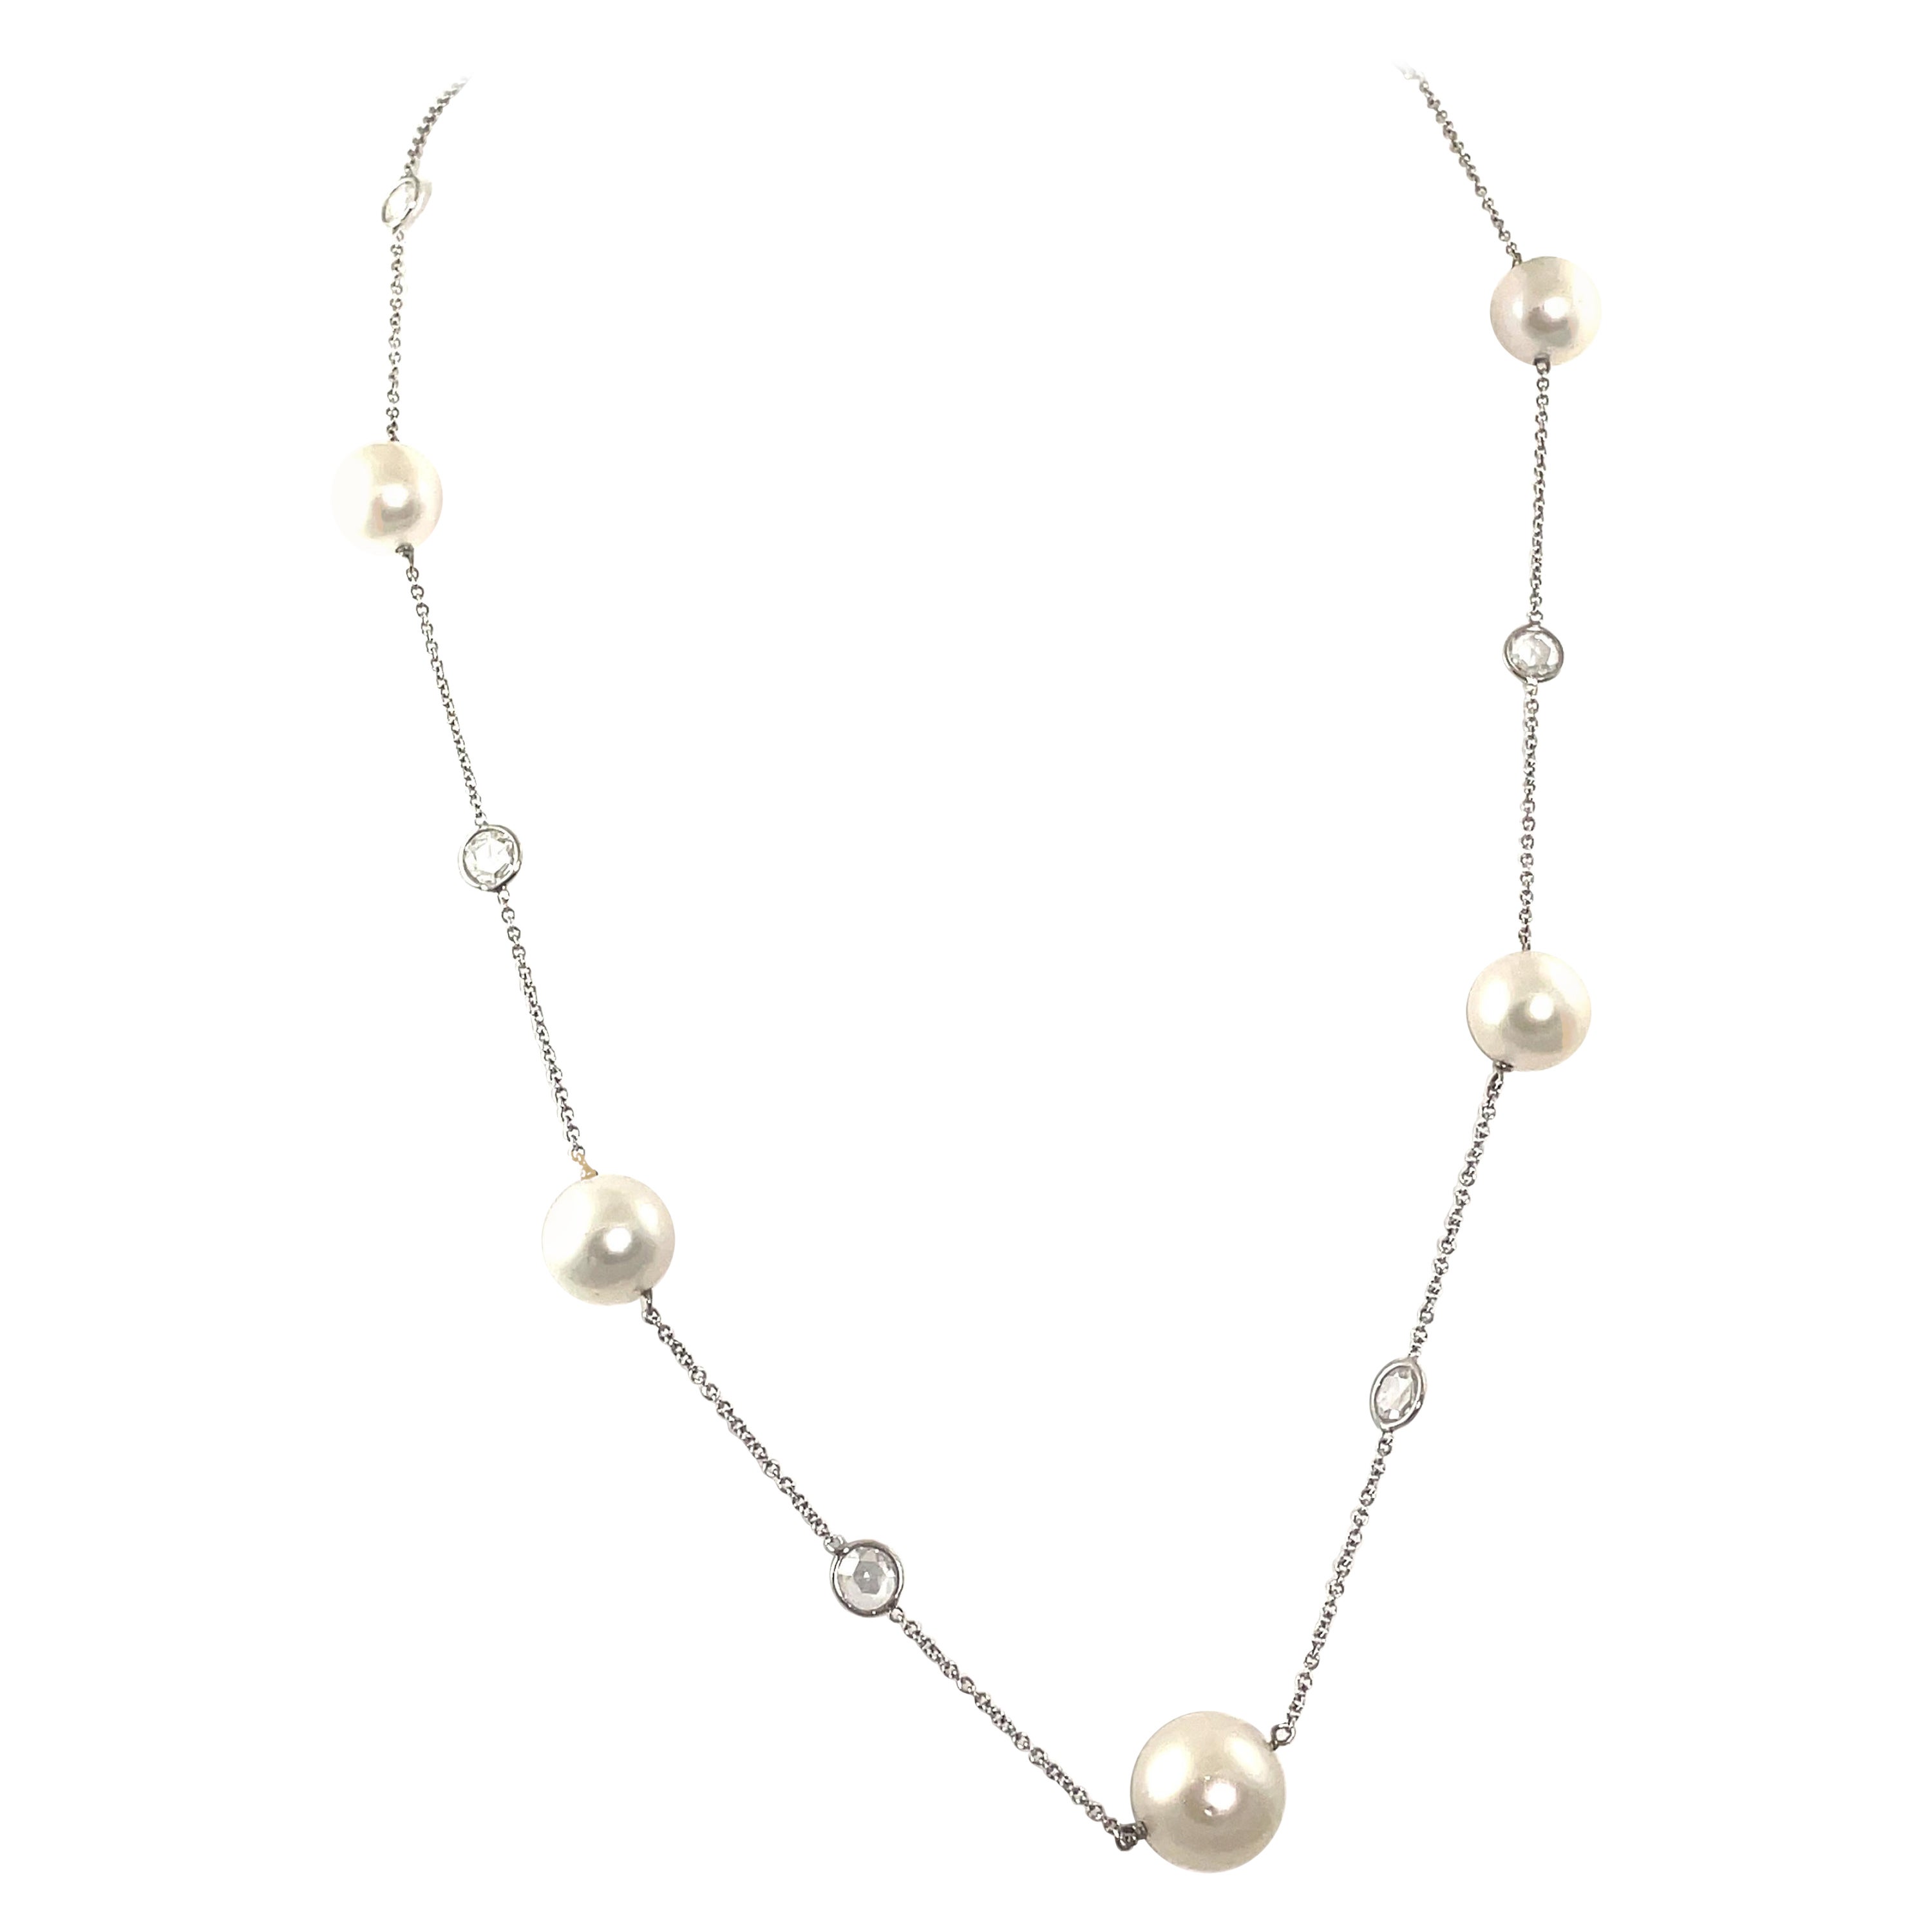 2.47ct Rose Cut Diamonds and Pearls by the Yard 18k White Gold